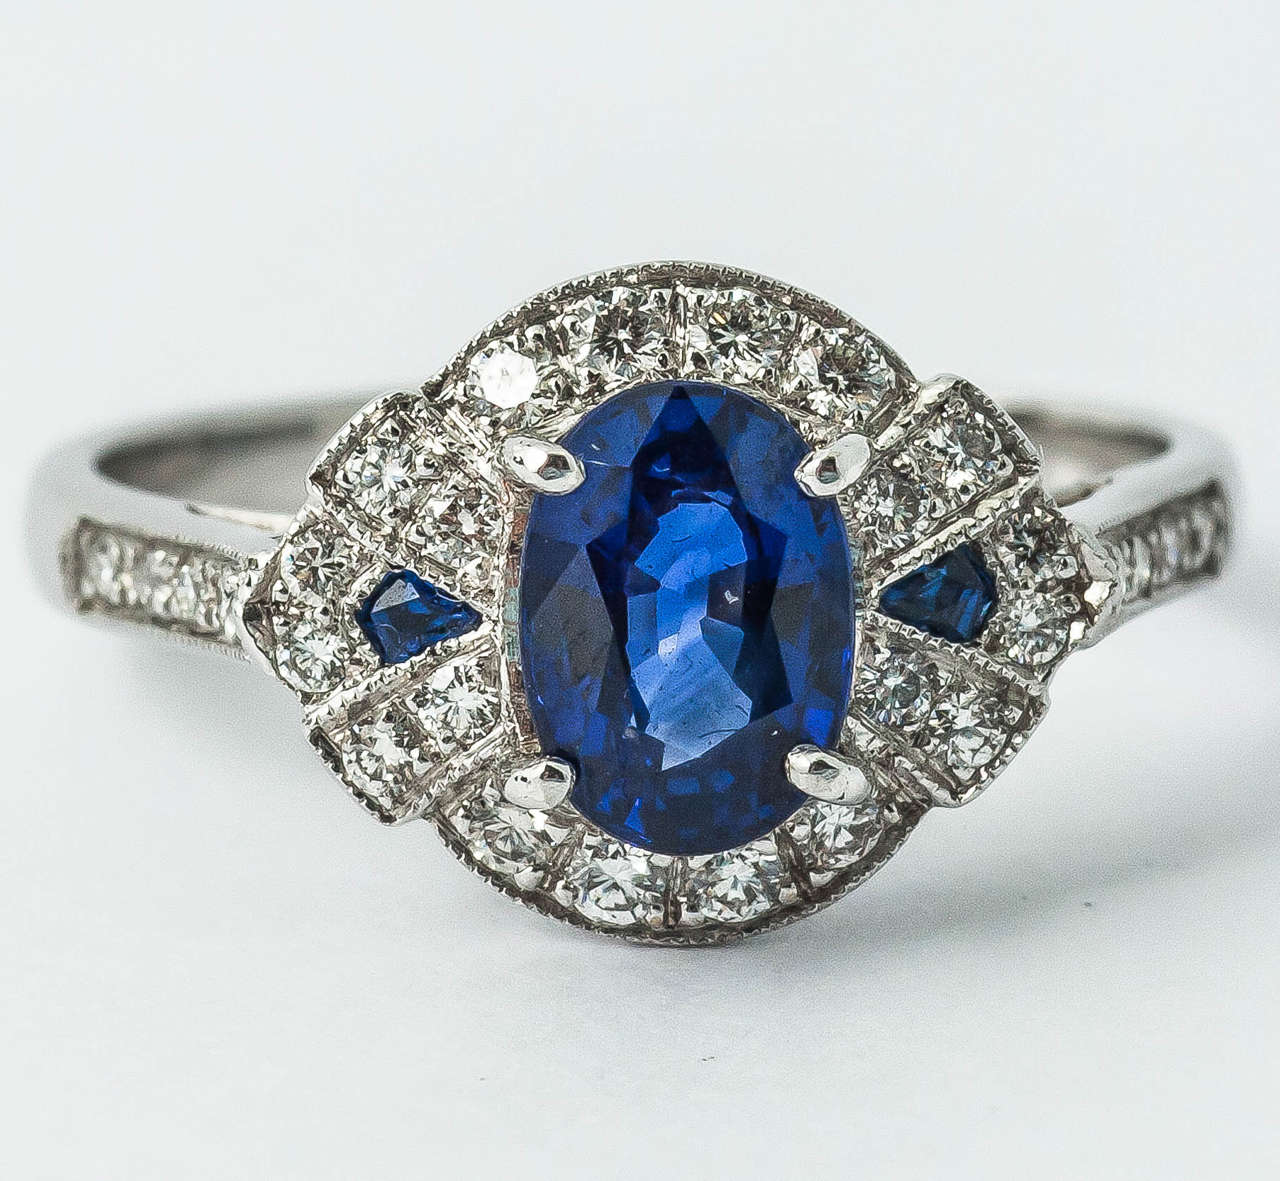 18k gold mounted sapphire and brilliant cut diamond ring with two sapphires in shoulder